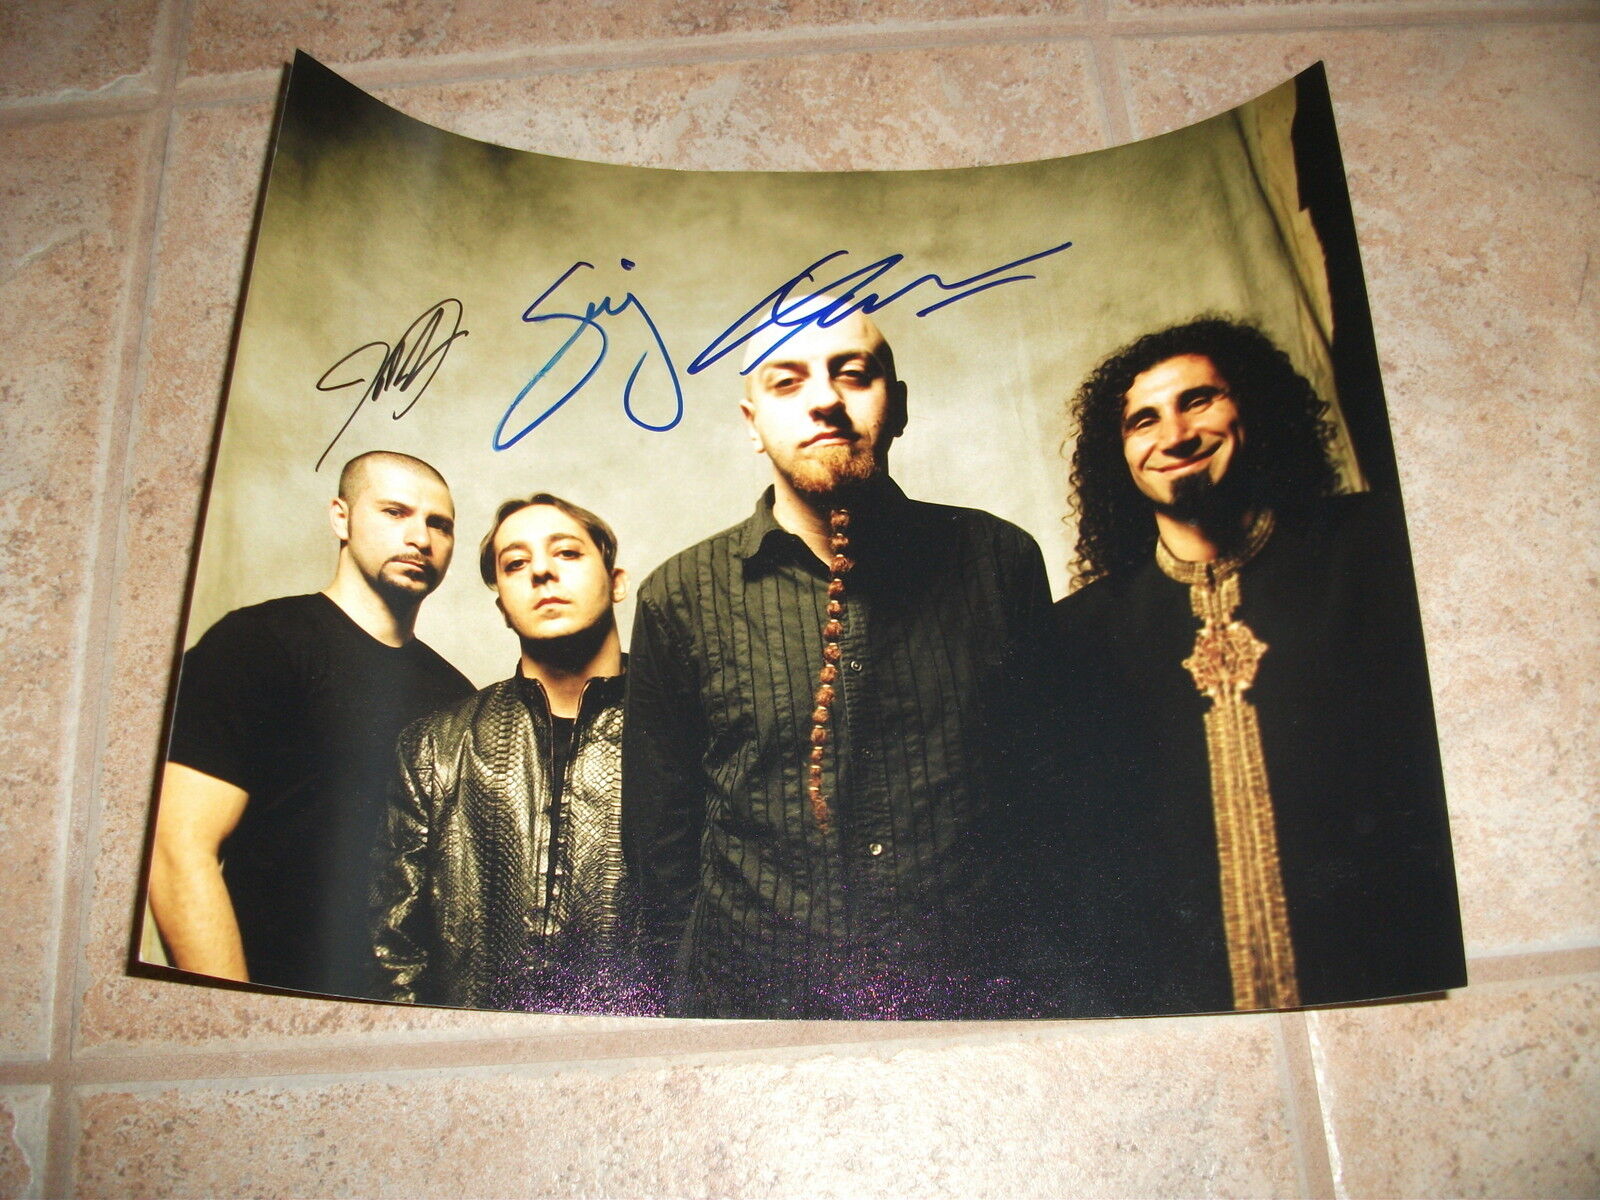 System Of A Down Signed Autographed 11x14 Promo Photo Poster painting x3 #1 SERJ +2 F1